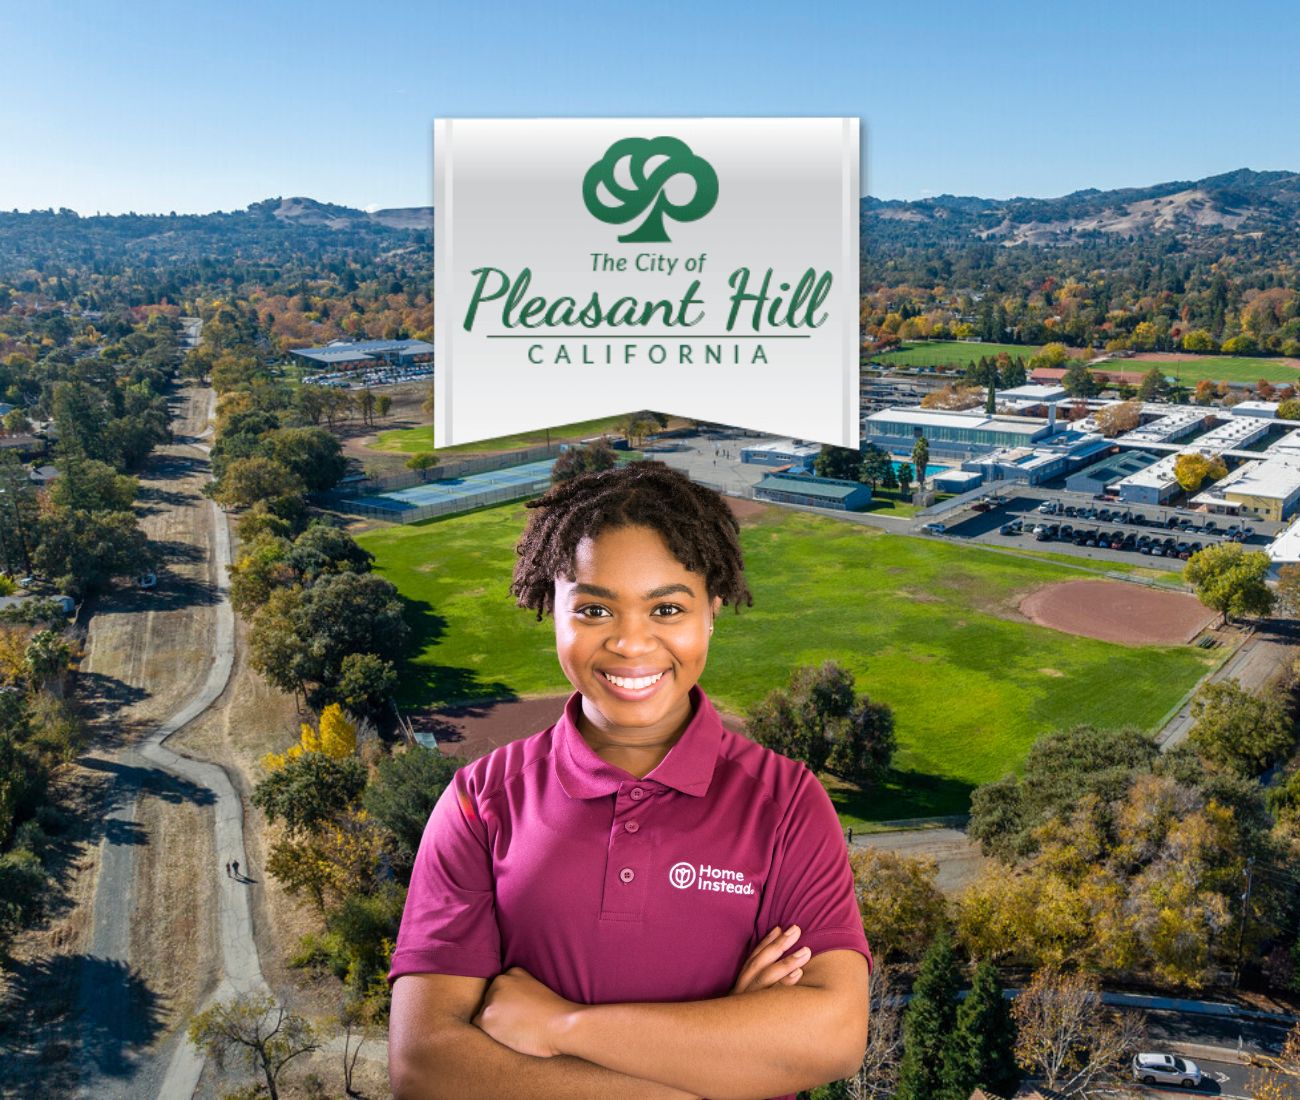 Home Instead caregiver with Pleasant Hill, California in the background